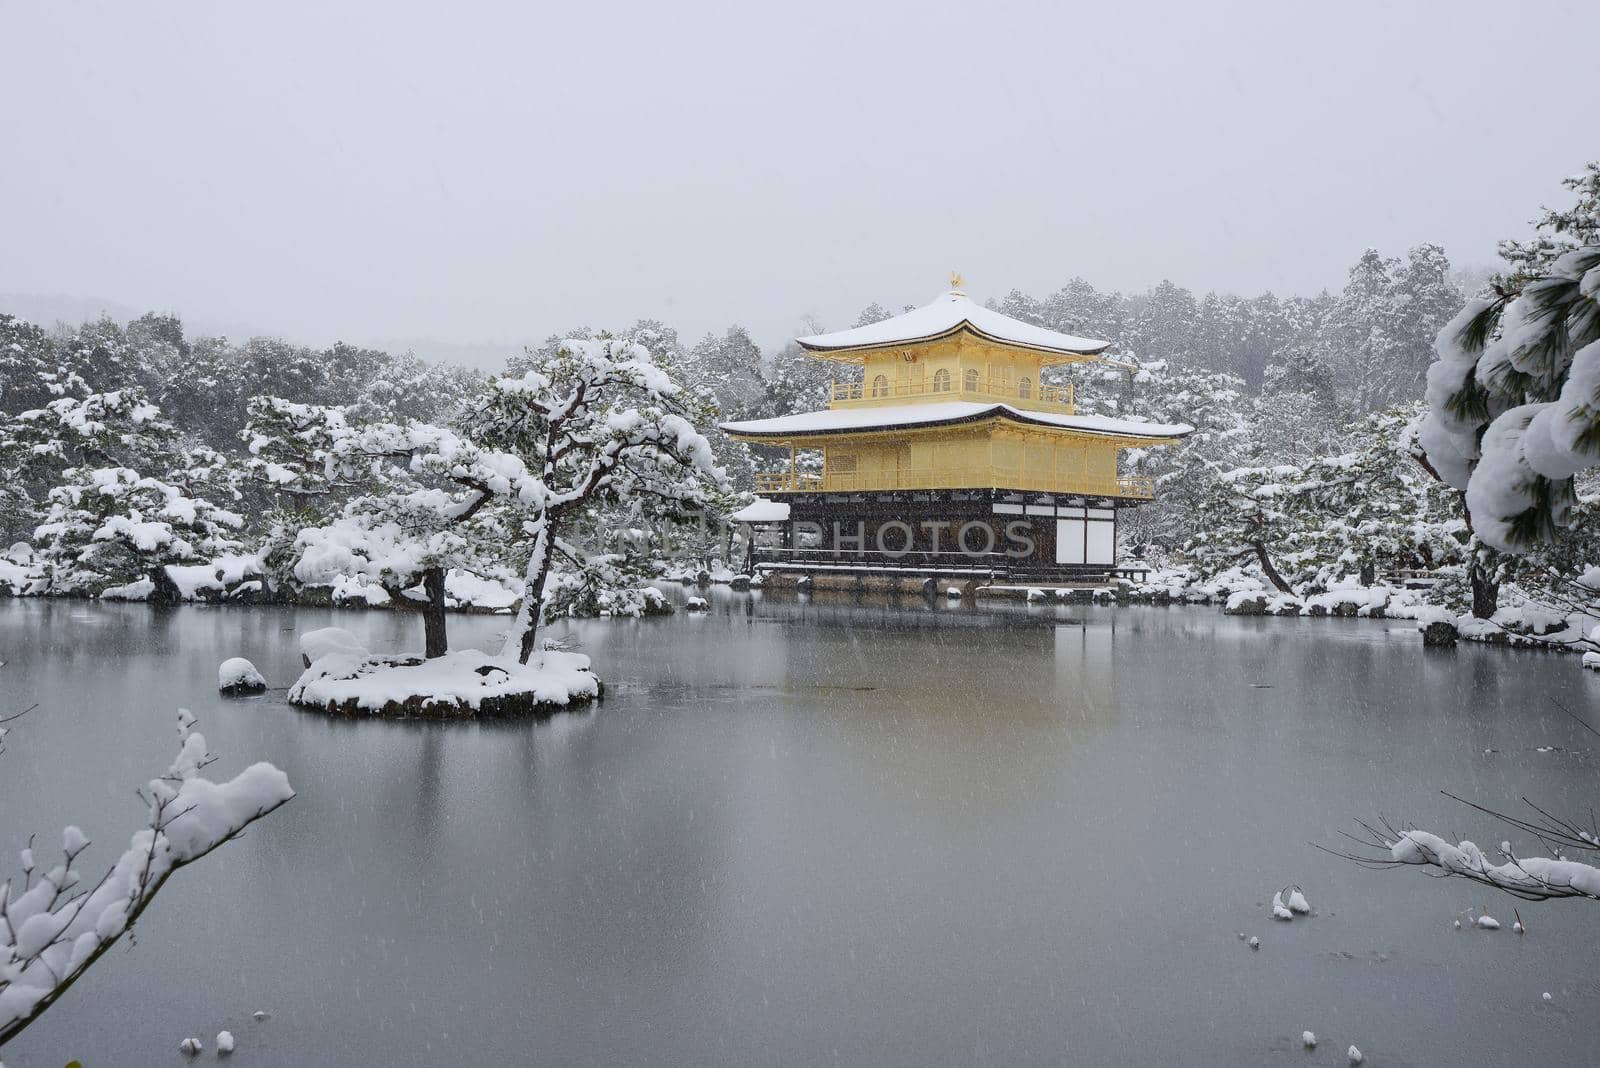 Kyoto Golden Temple with snow